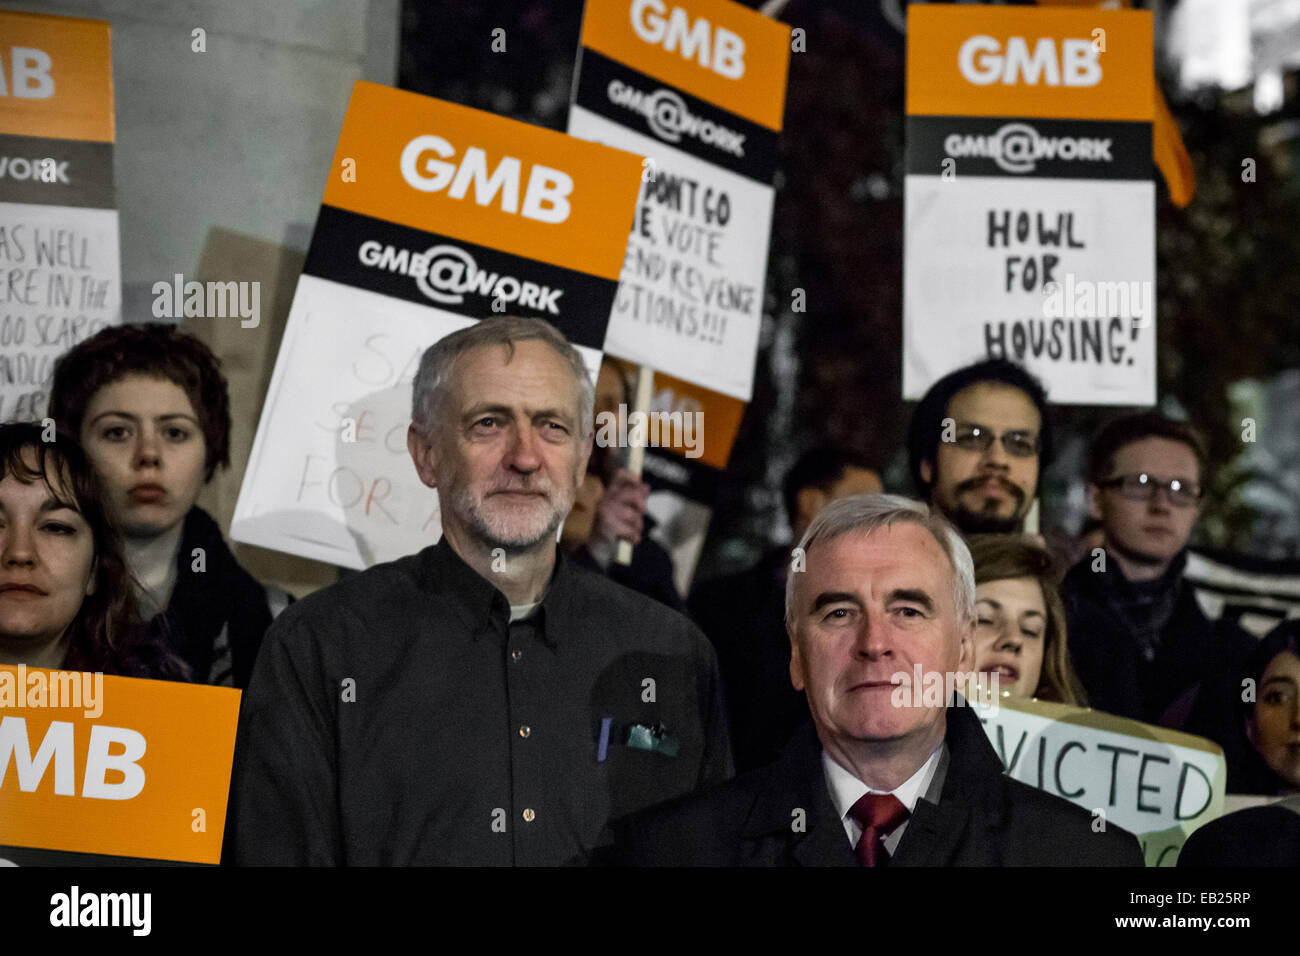 London, UK. 24th Nov, 2014. MPs Jeremy Corbyn (L) and John Mcdonnell (R) at ‘End Revenge Evictions’ protest in Westminster © Guy Corbishley/Alamy Live News Stock Photo